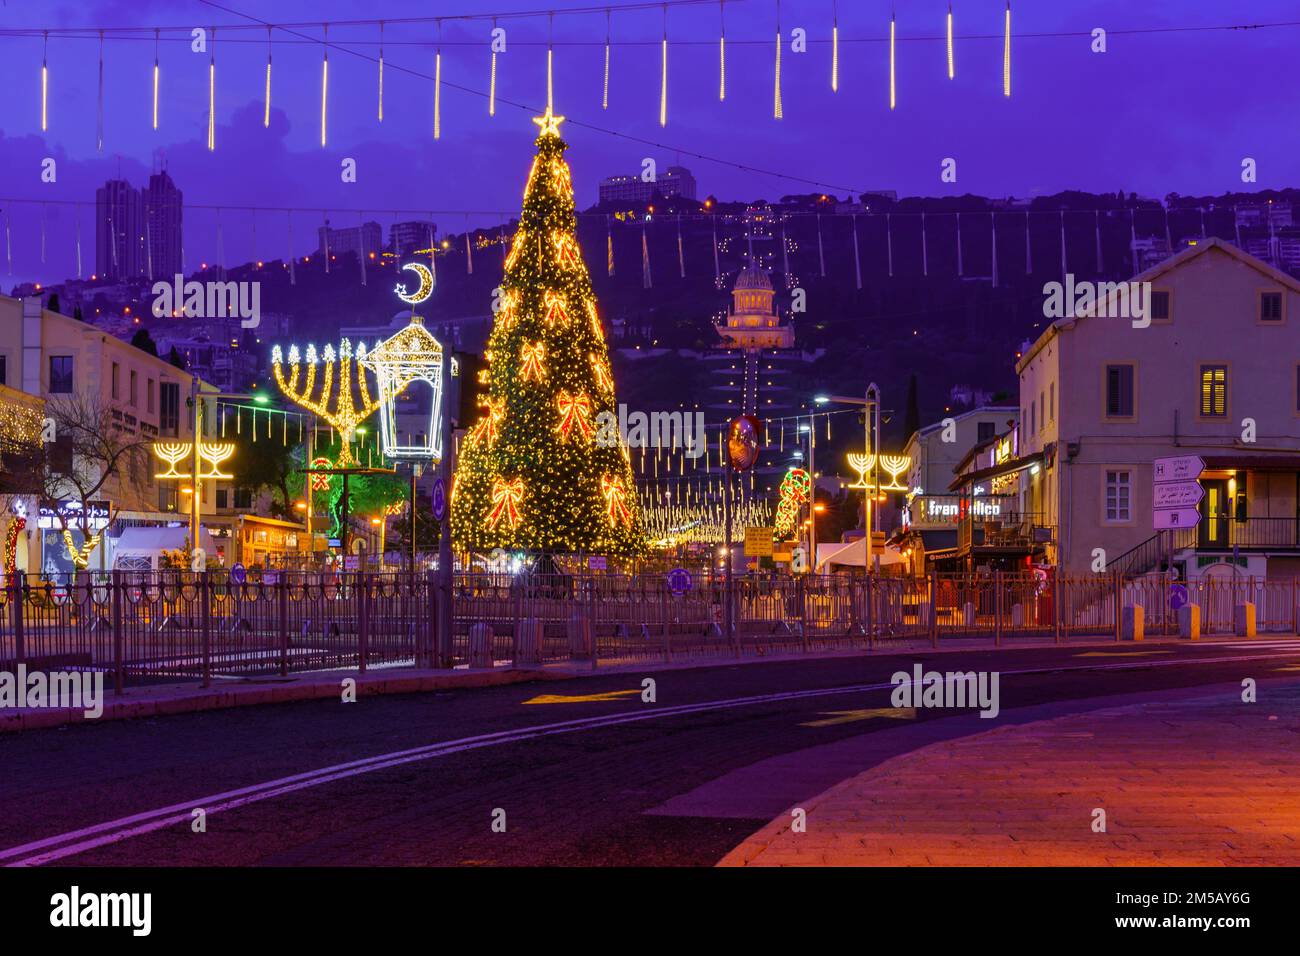 Haifa, Israel - December 23, 2022: The Holiday of Holidays scene in the German Colony, with a Christmas tree, Hanukkah Menorah, Muslim Crescent and th Stock Photo